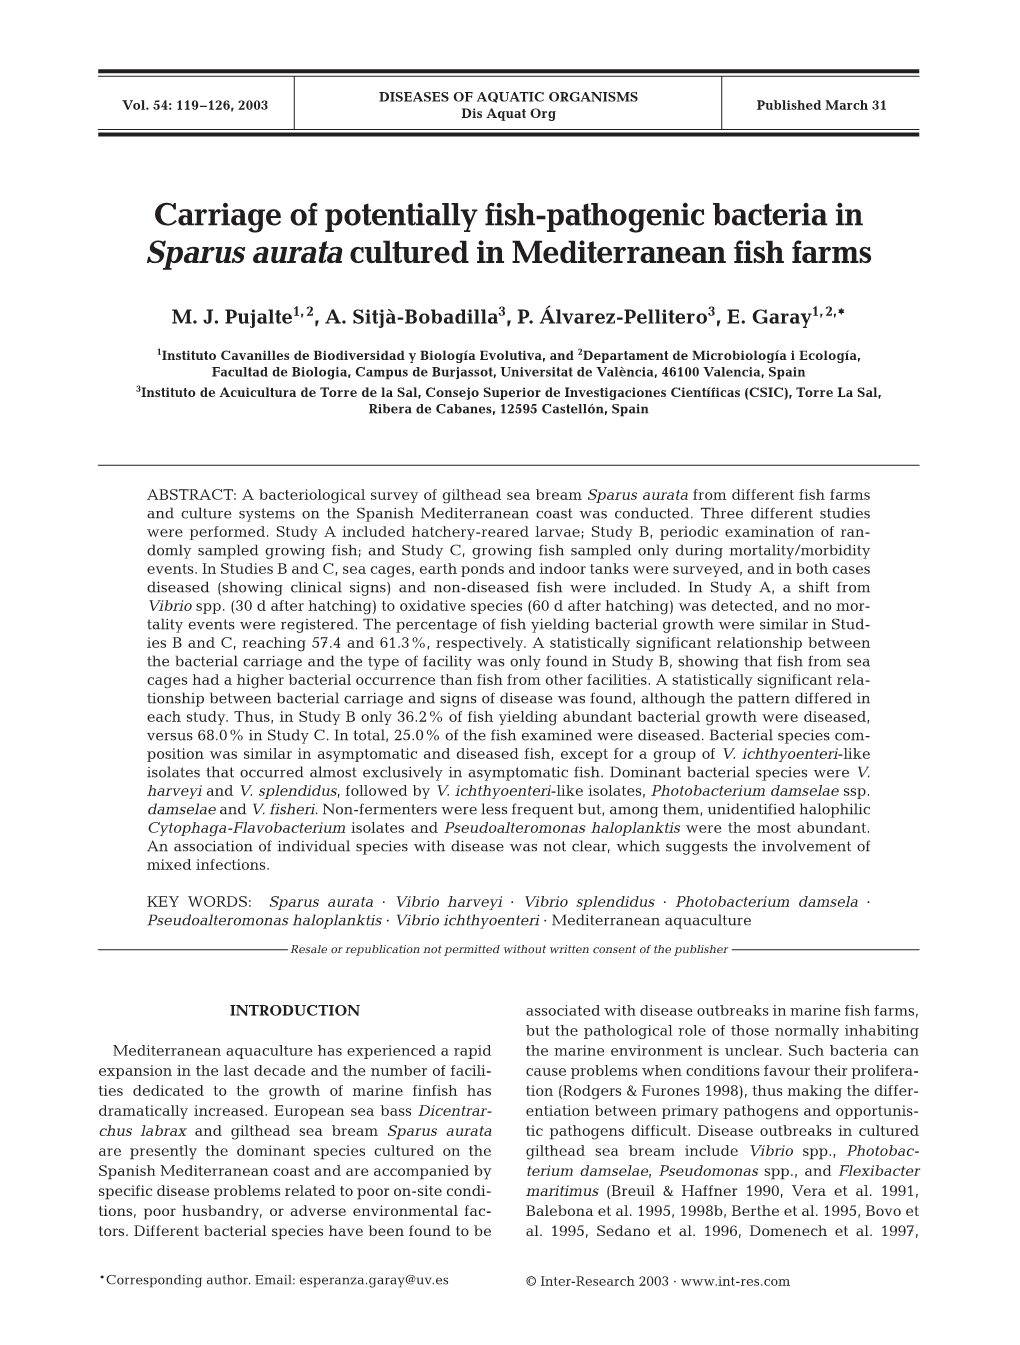 Carriage of Potentially Fish-Pathogenic Bacteria in Sparus Aurata Cultured in Mediterranean Fish Farms